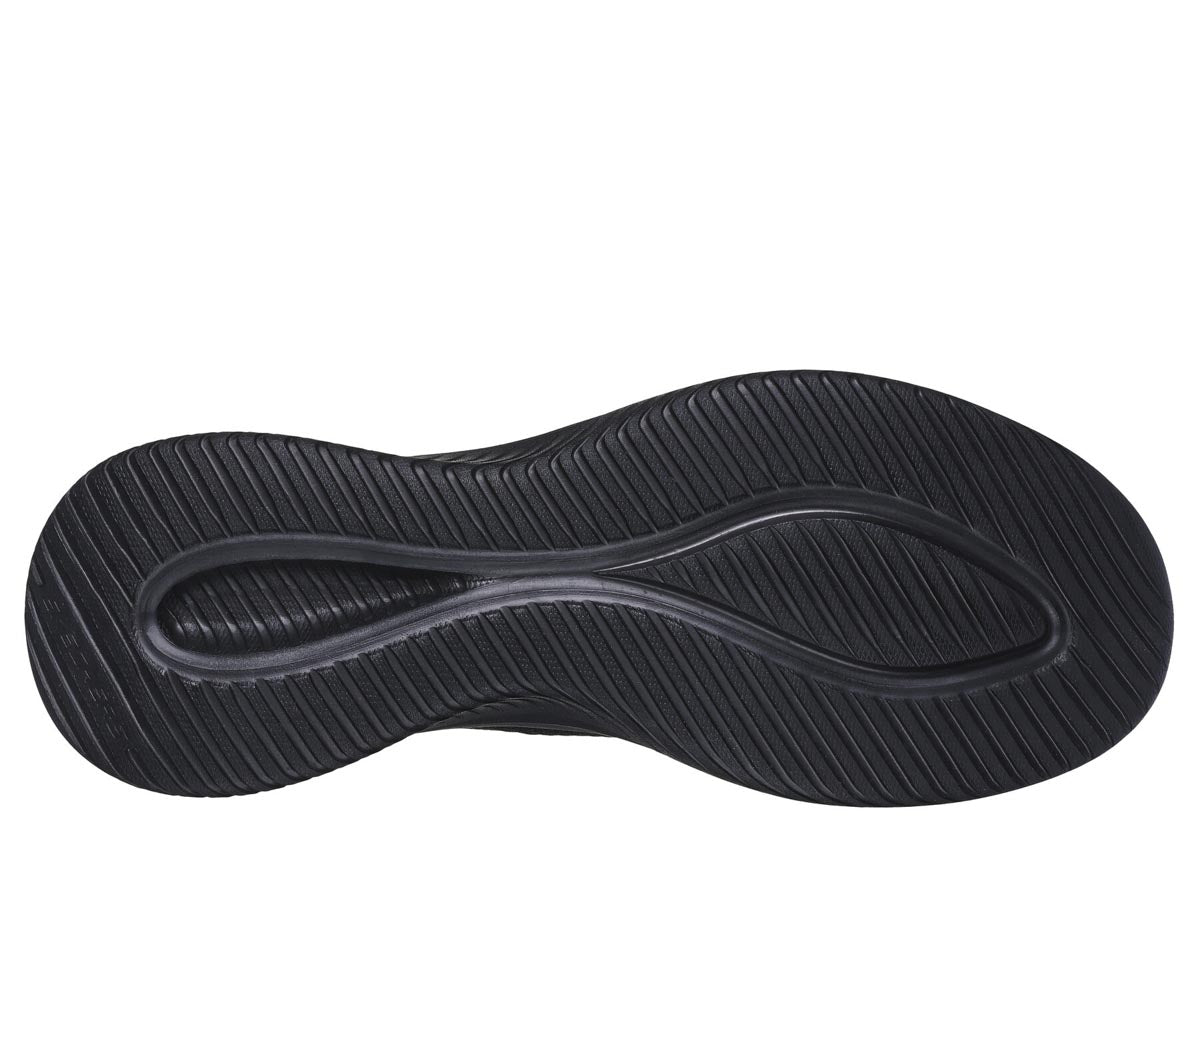 Close-up of the flexible traction outsole on Skechers Ultra Flex 3.0.